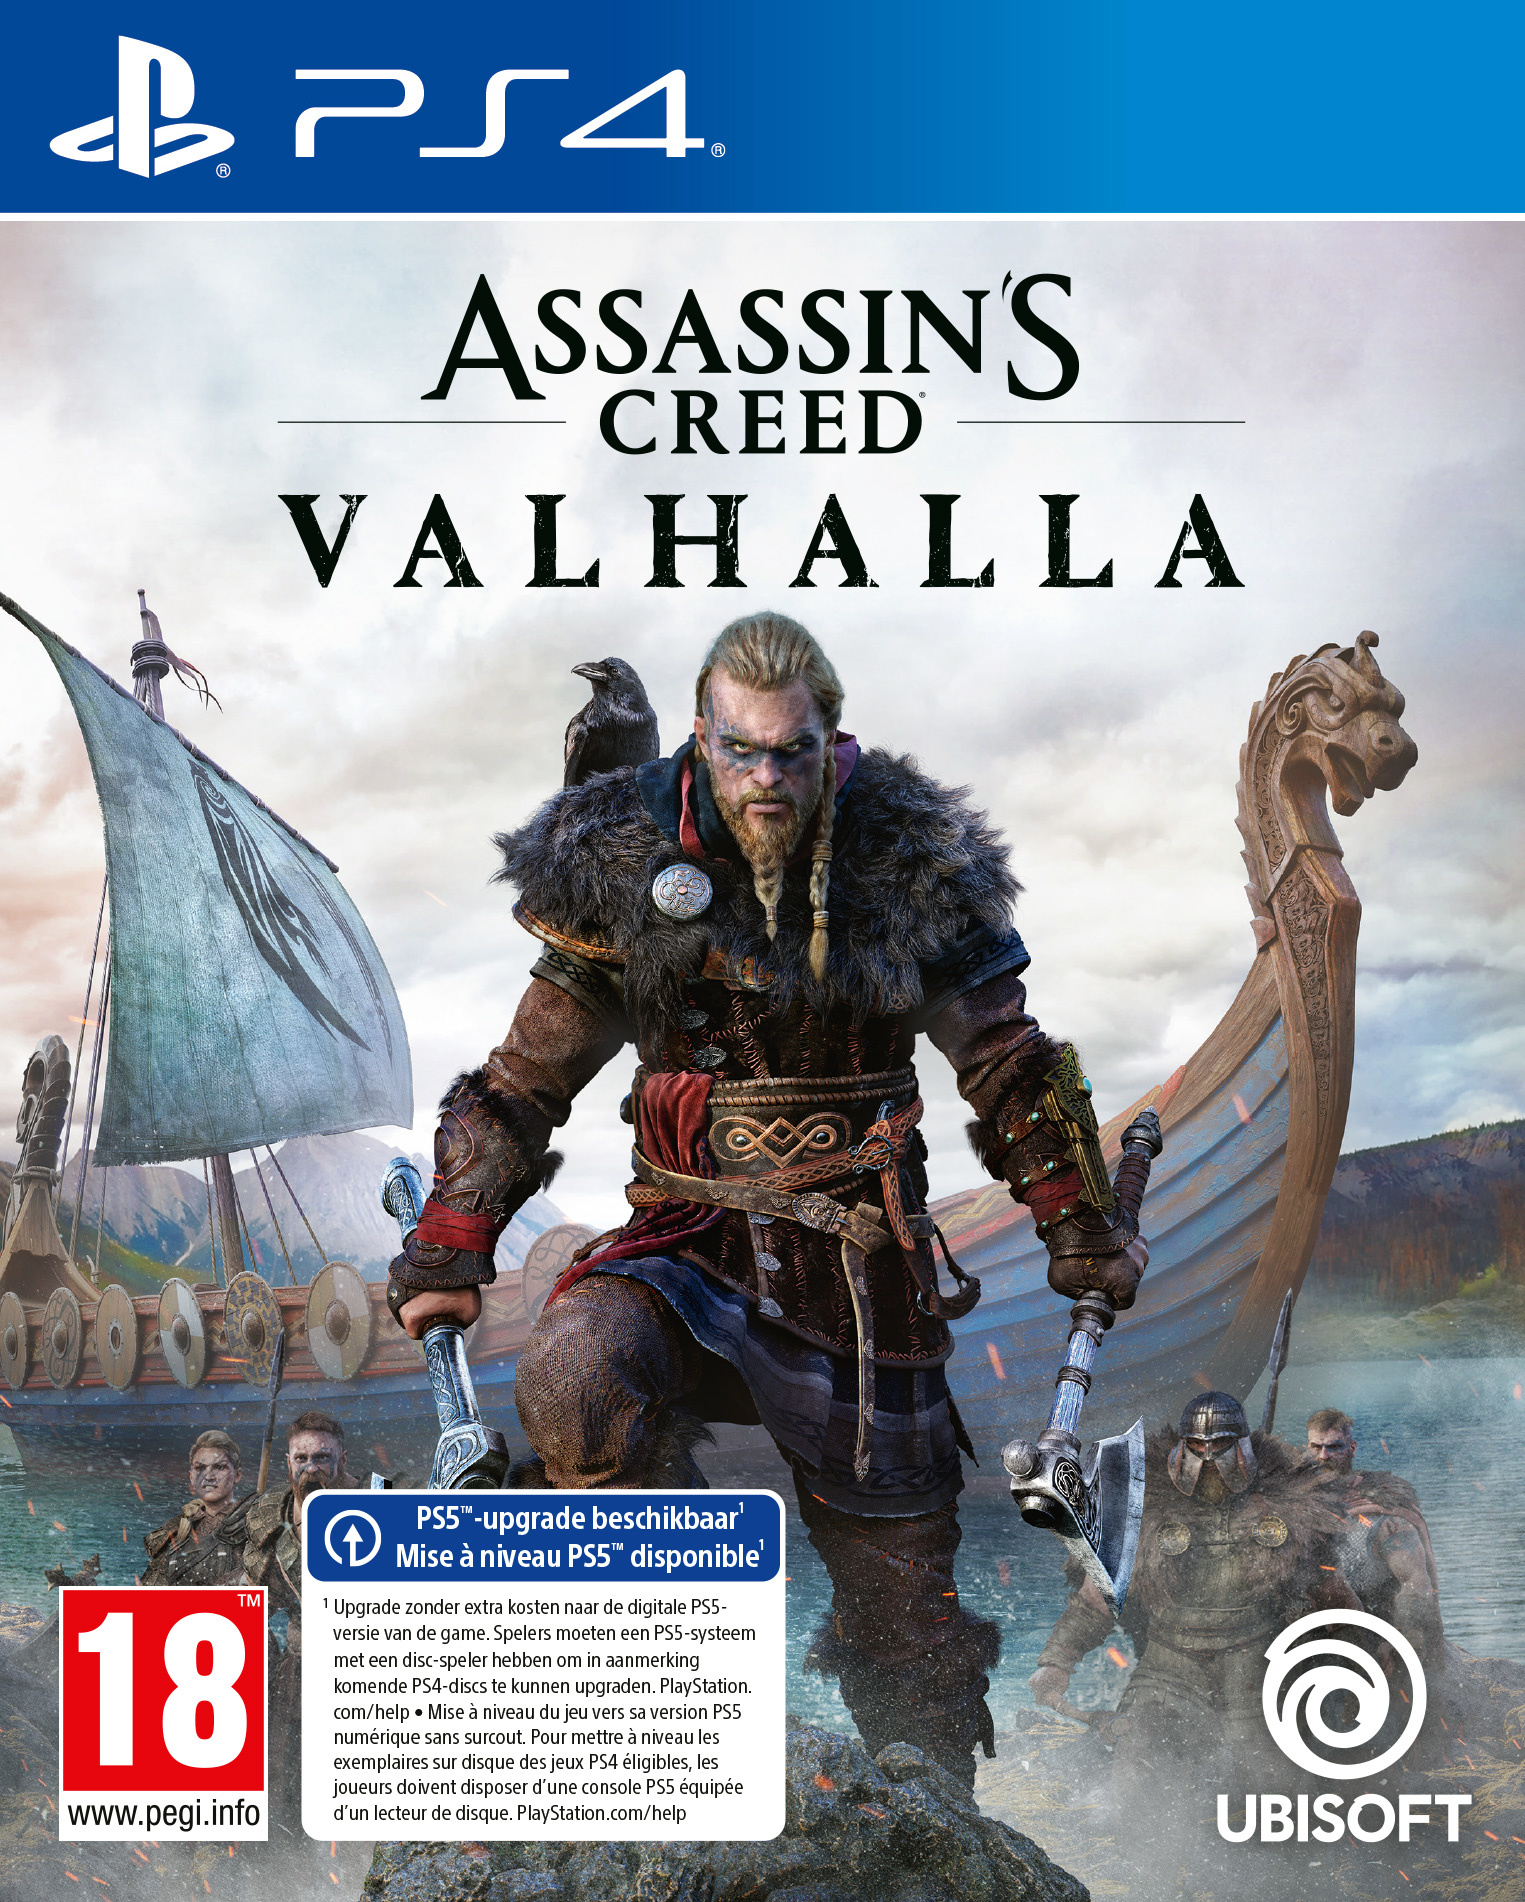 Tante Draaien mond PS4 Assassin's Creed: Valhalla kopen - AllYourGames.nl